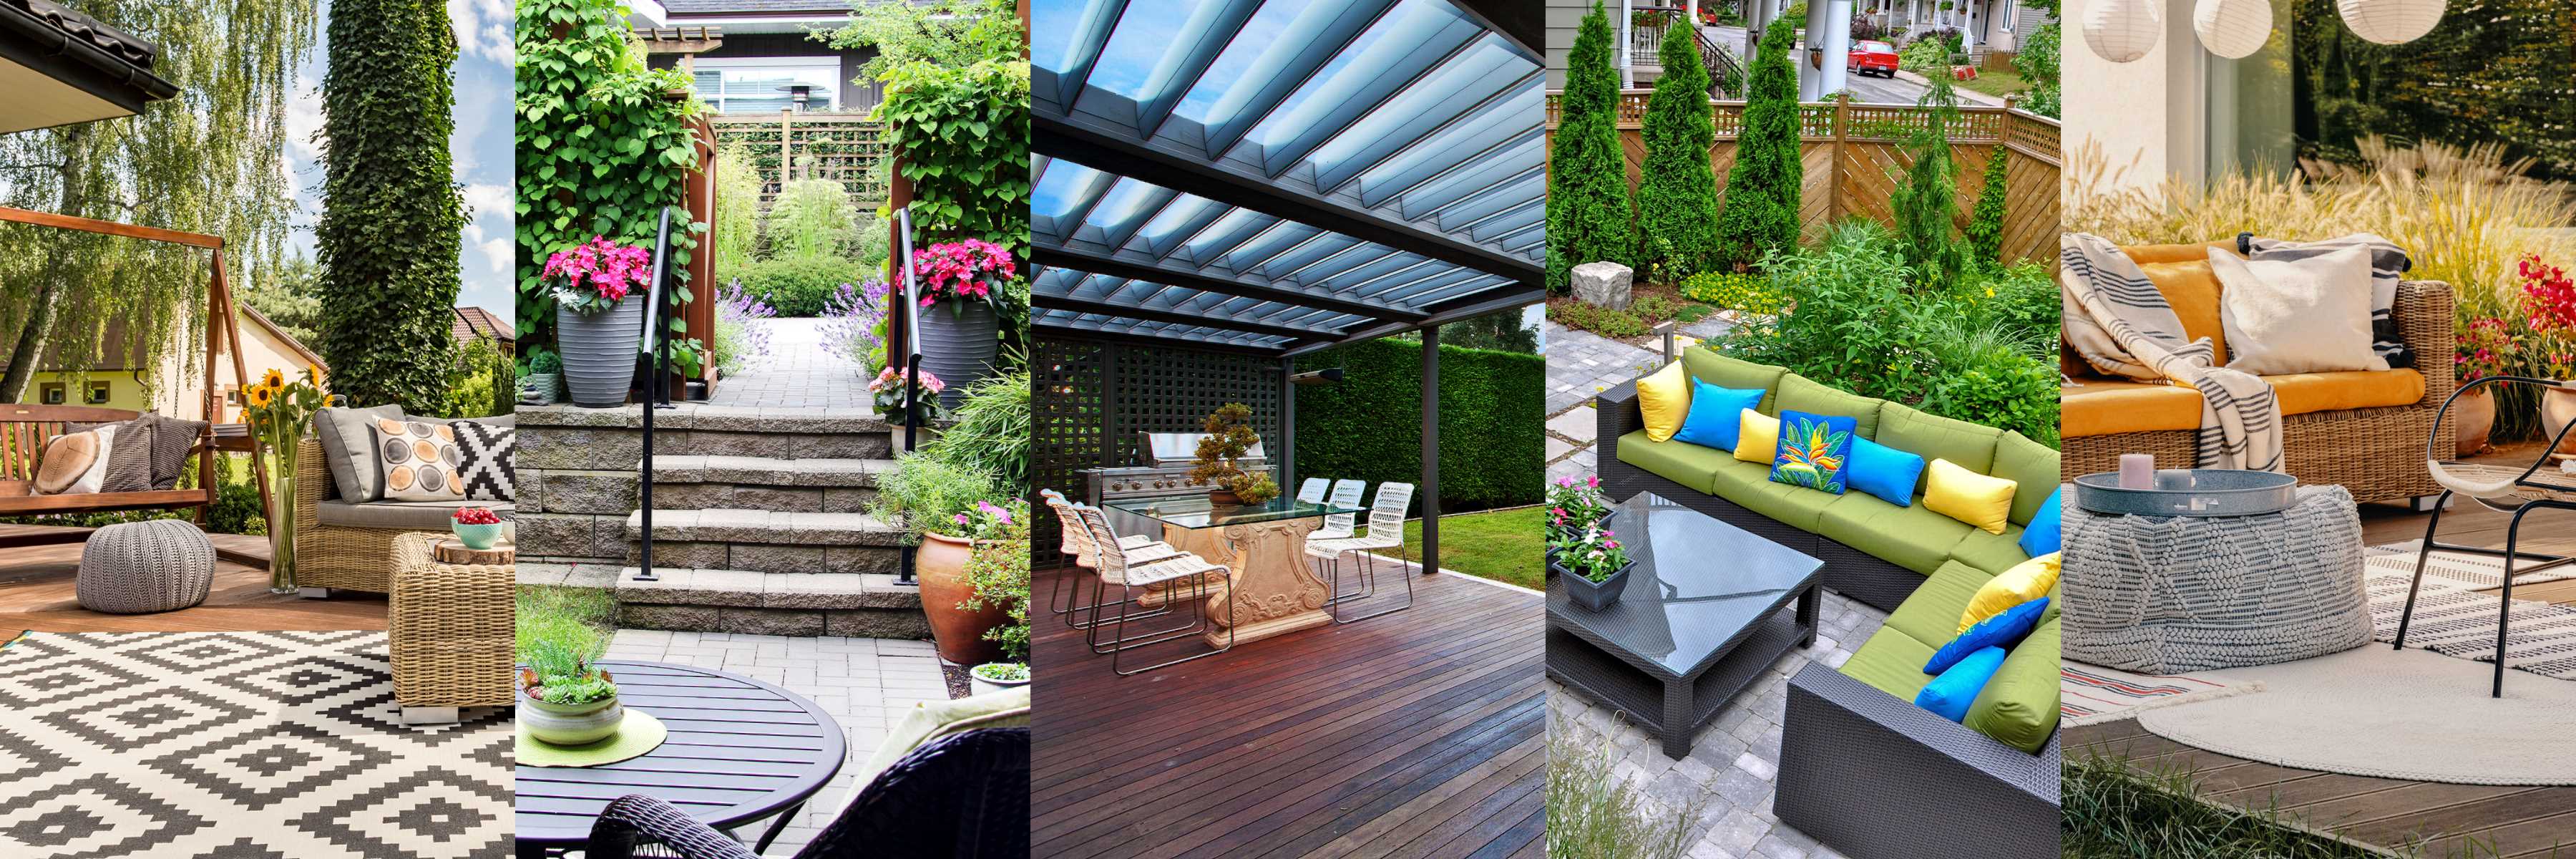 Outdoor Patio Ideas for Home Banner image